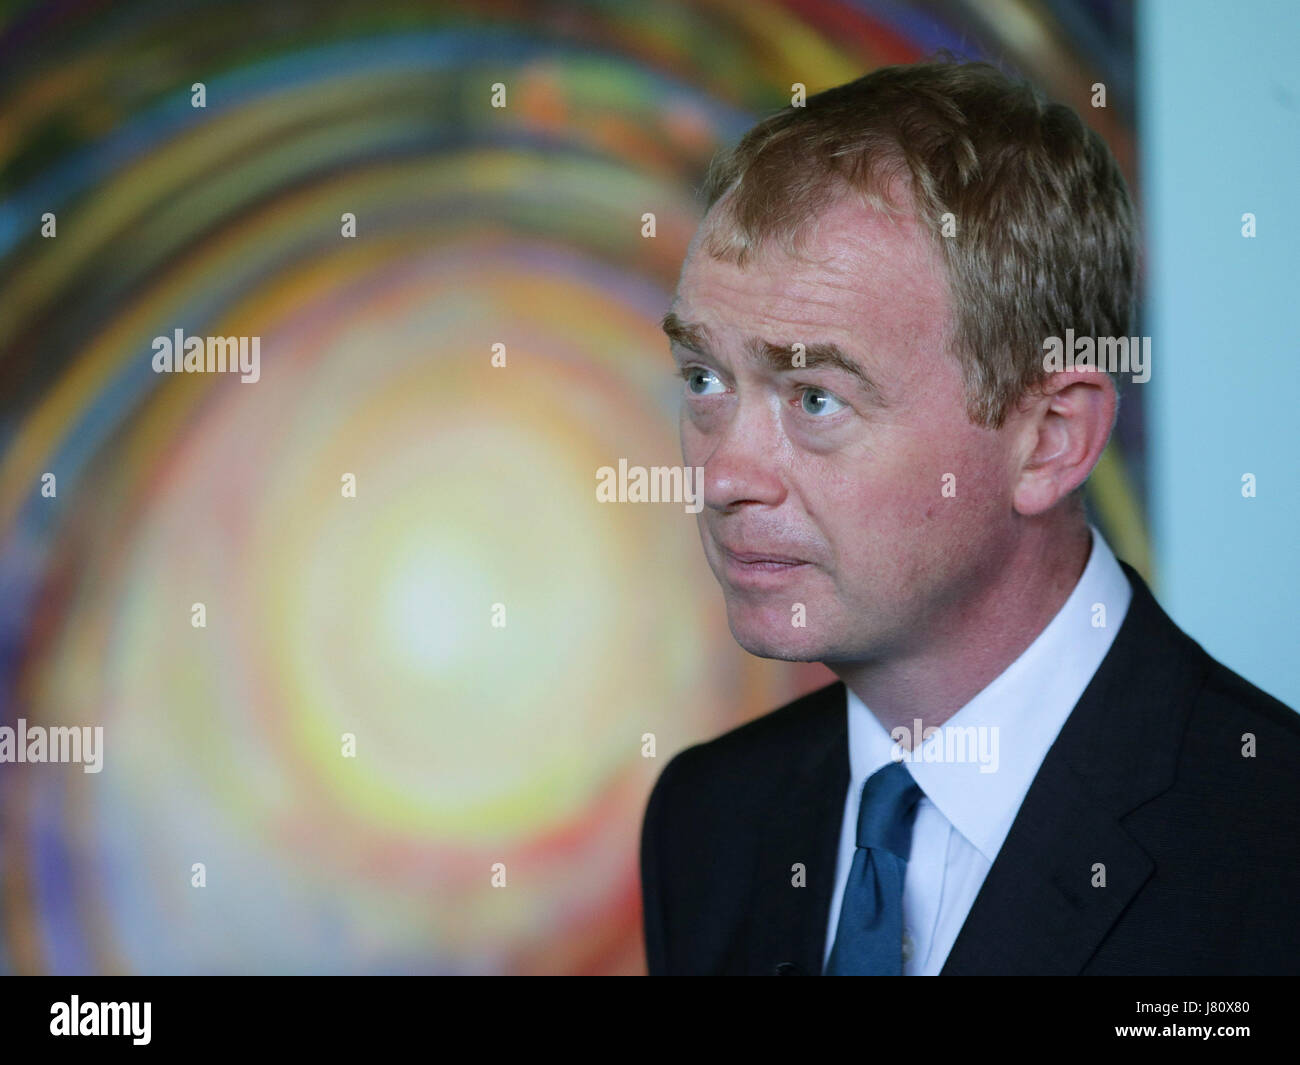 Liberal Democrat leader Tim Farron visits the Tim Parry & Johnathan Ball Foundation for Peace, during a General Election campaign event in Warrington. Stock Photo